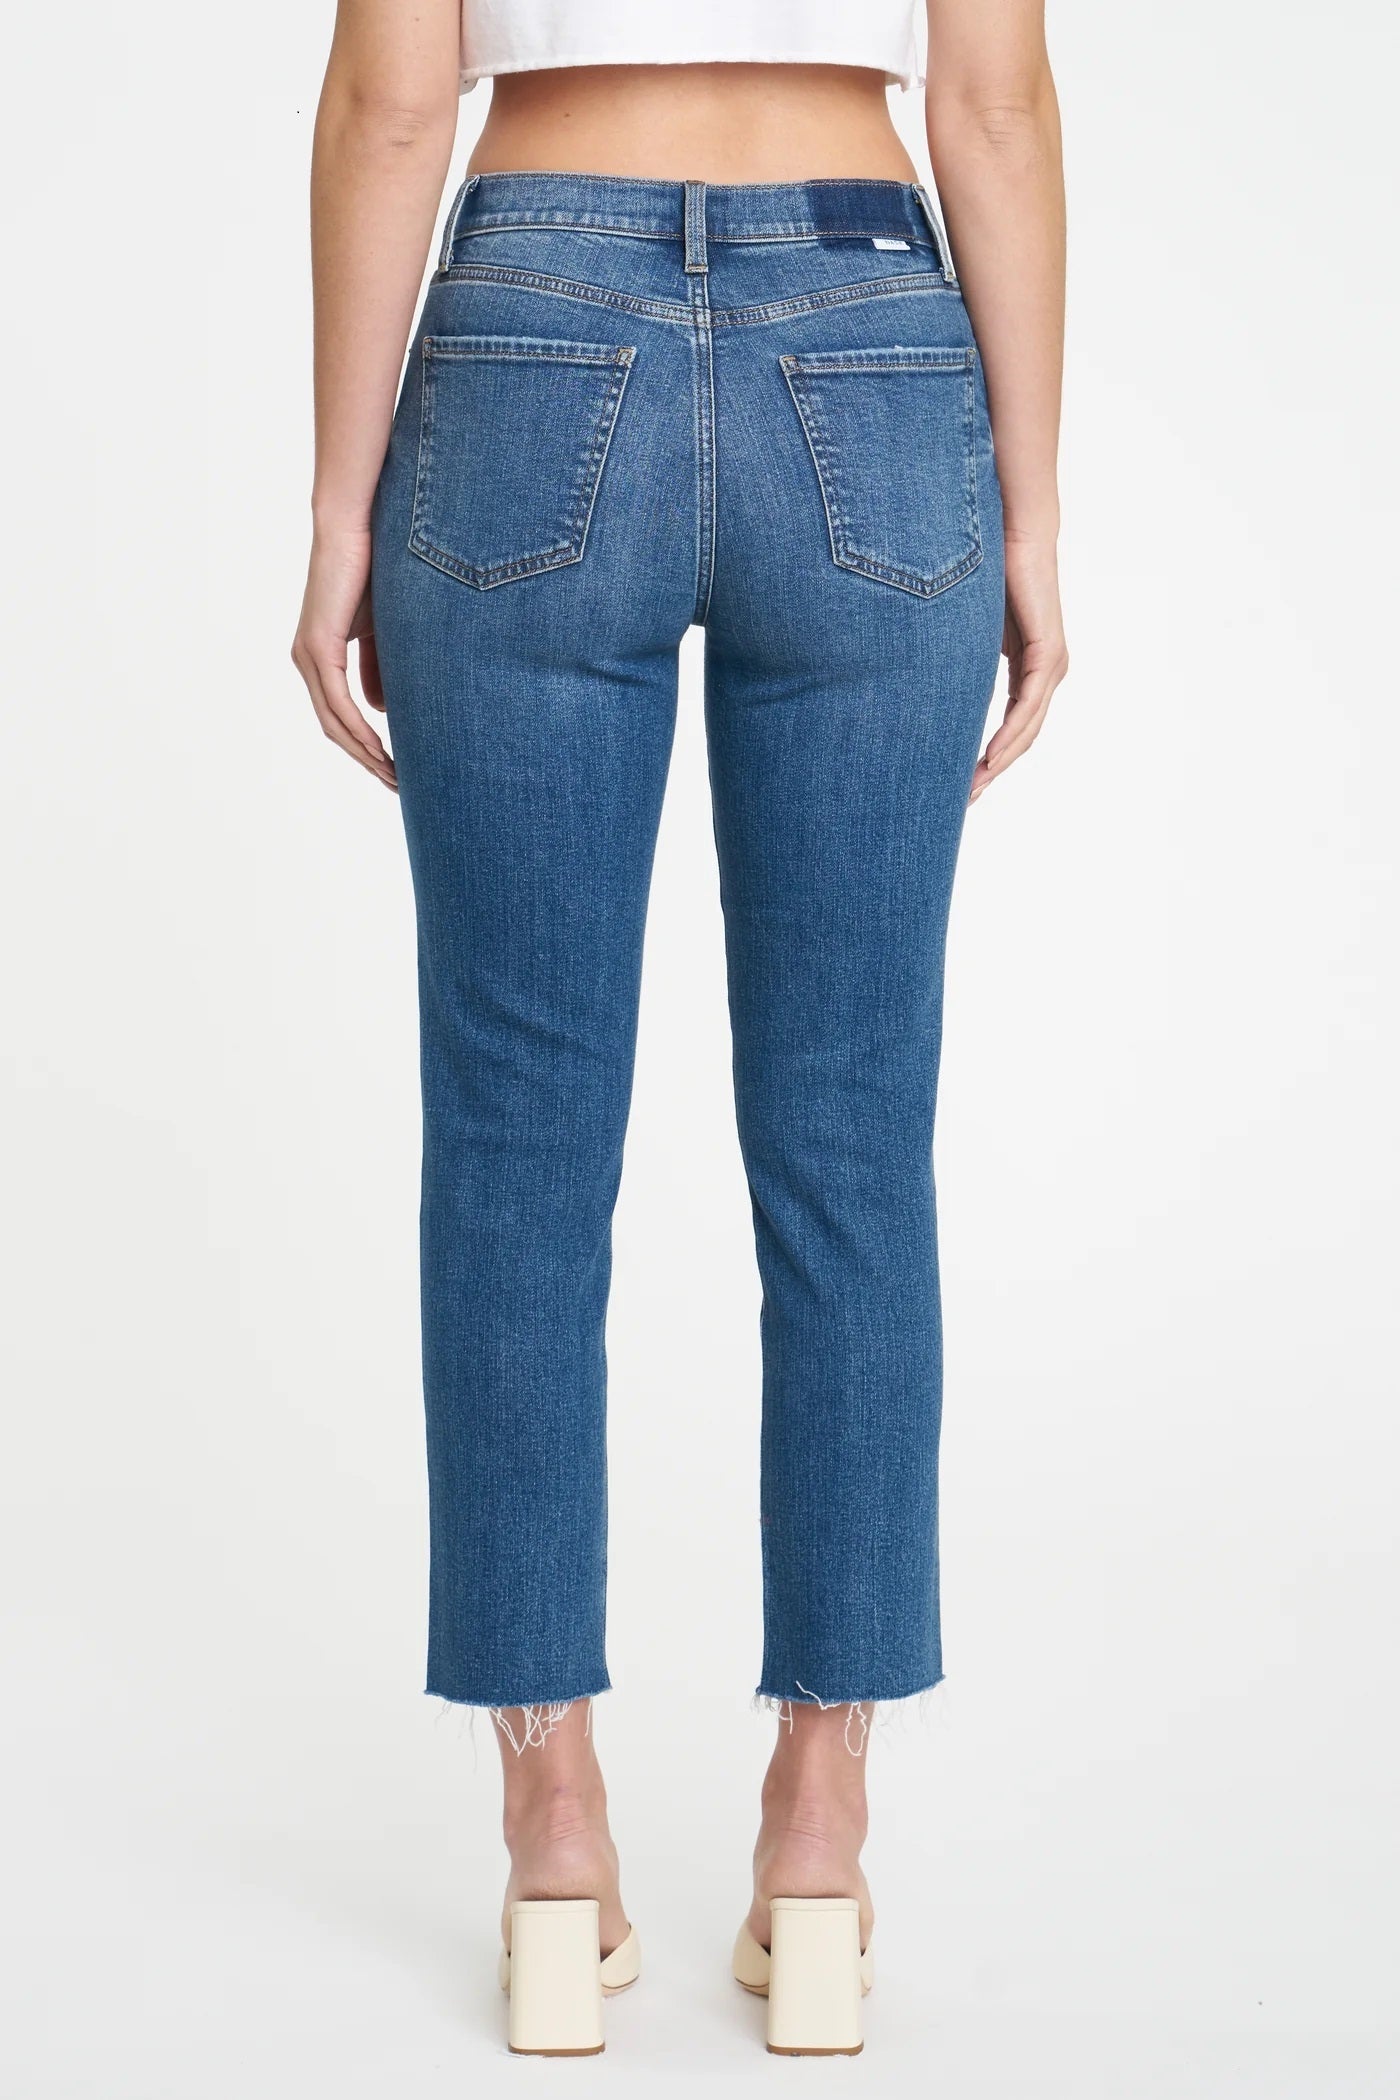 Daze, Daily Driver High Rise Skinny Straight in Kiss Me - Boutique Dandelion